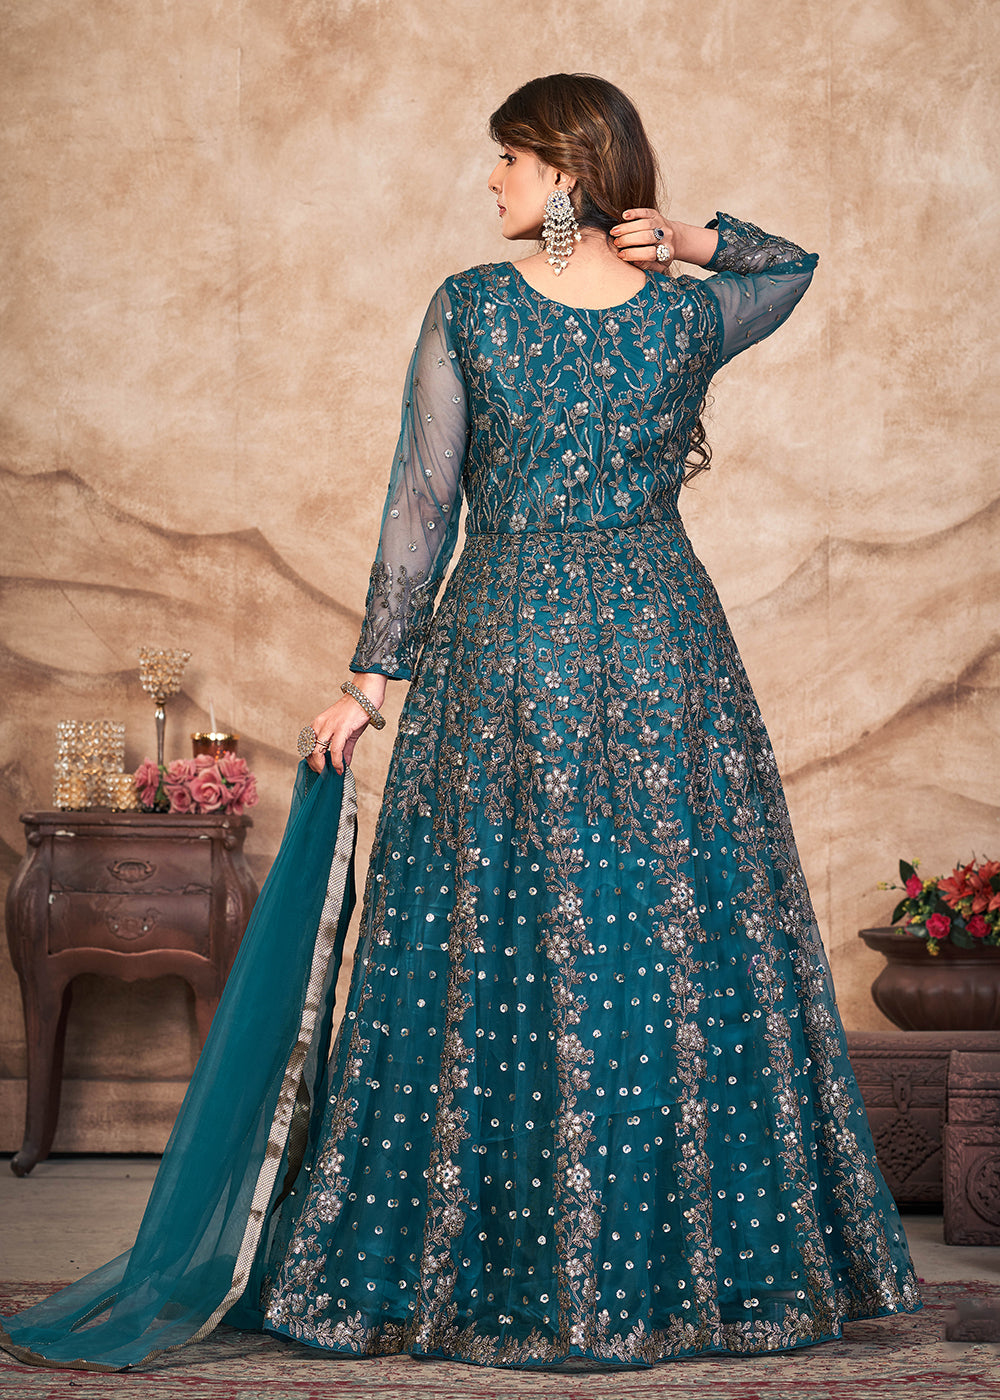 Maharani's Designer Ball (Princess) Gown - Peacock Blue with Heavy Gol –  Maharani Collections